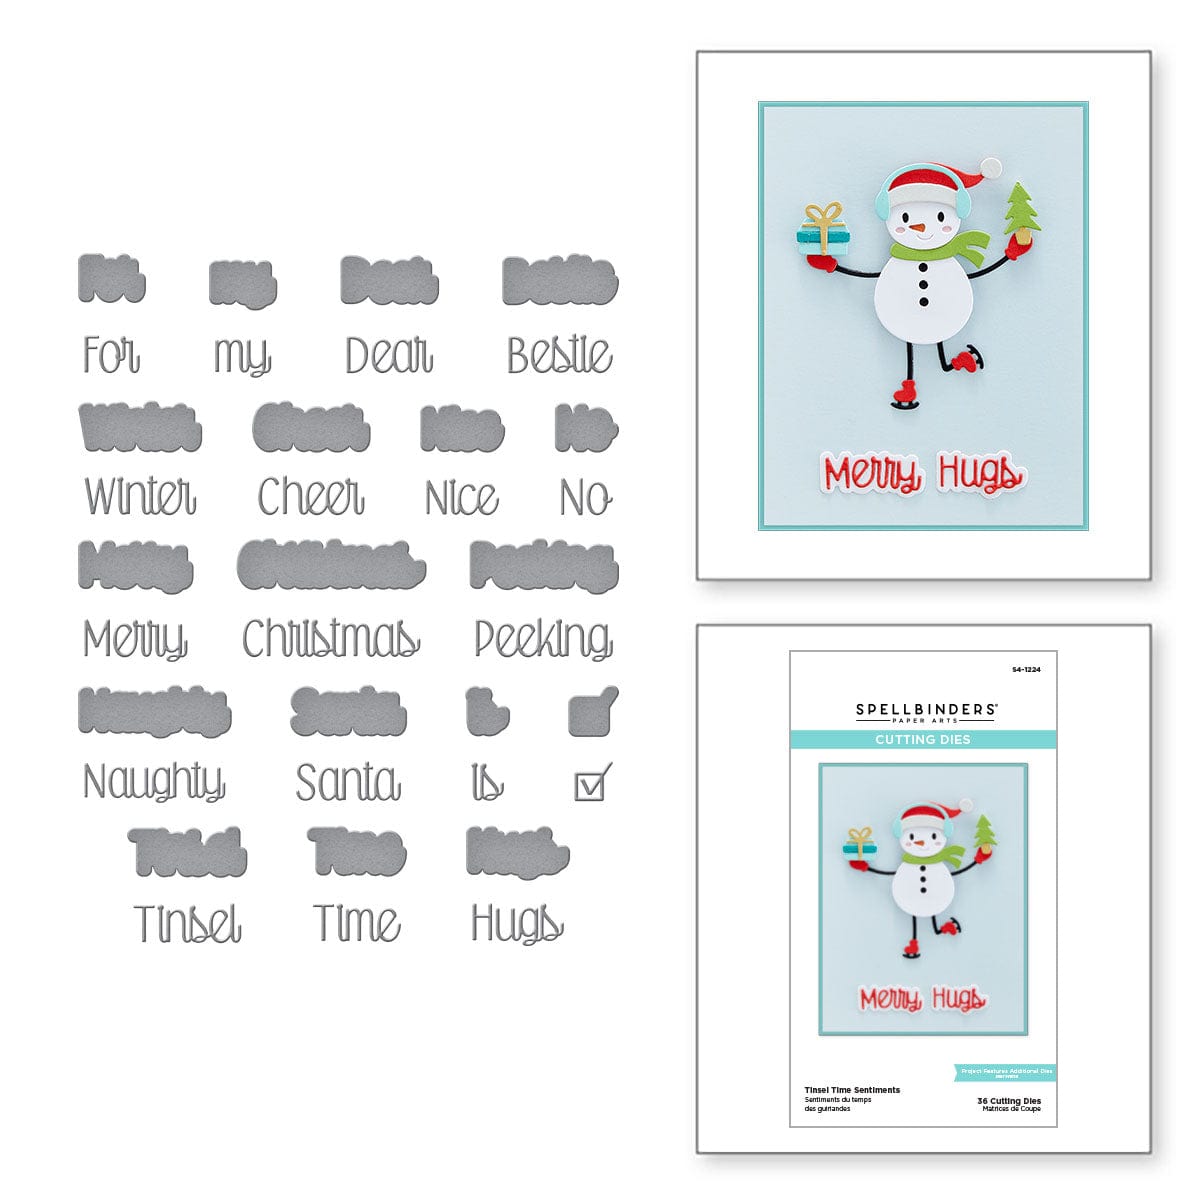 Spellbinders Clear Acrylic Stamps-Handmade Gift Tags - Tinsel Time